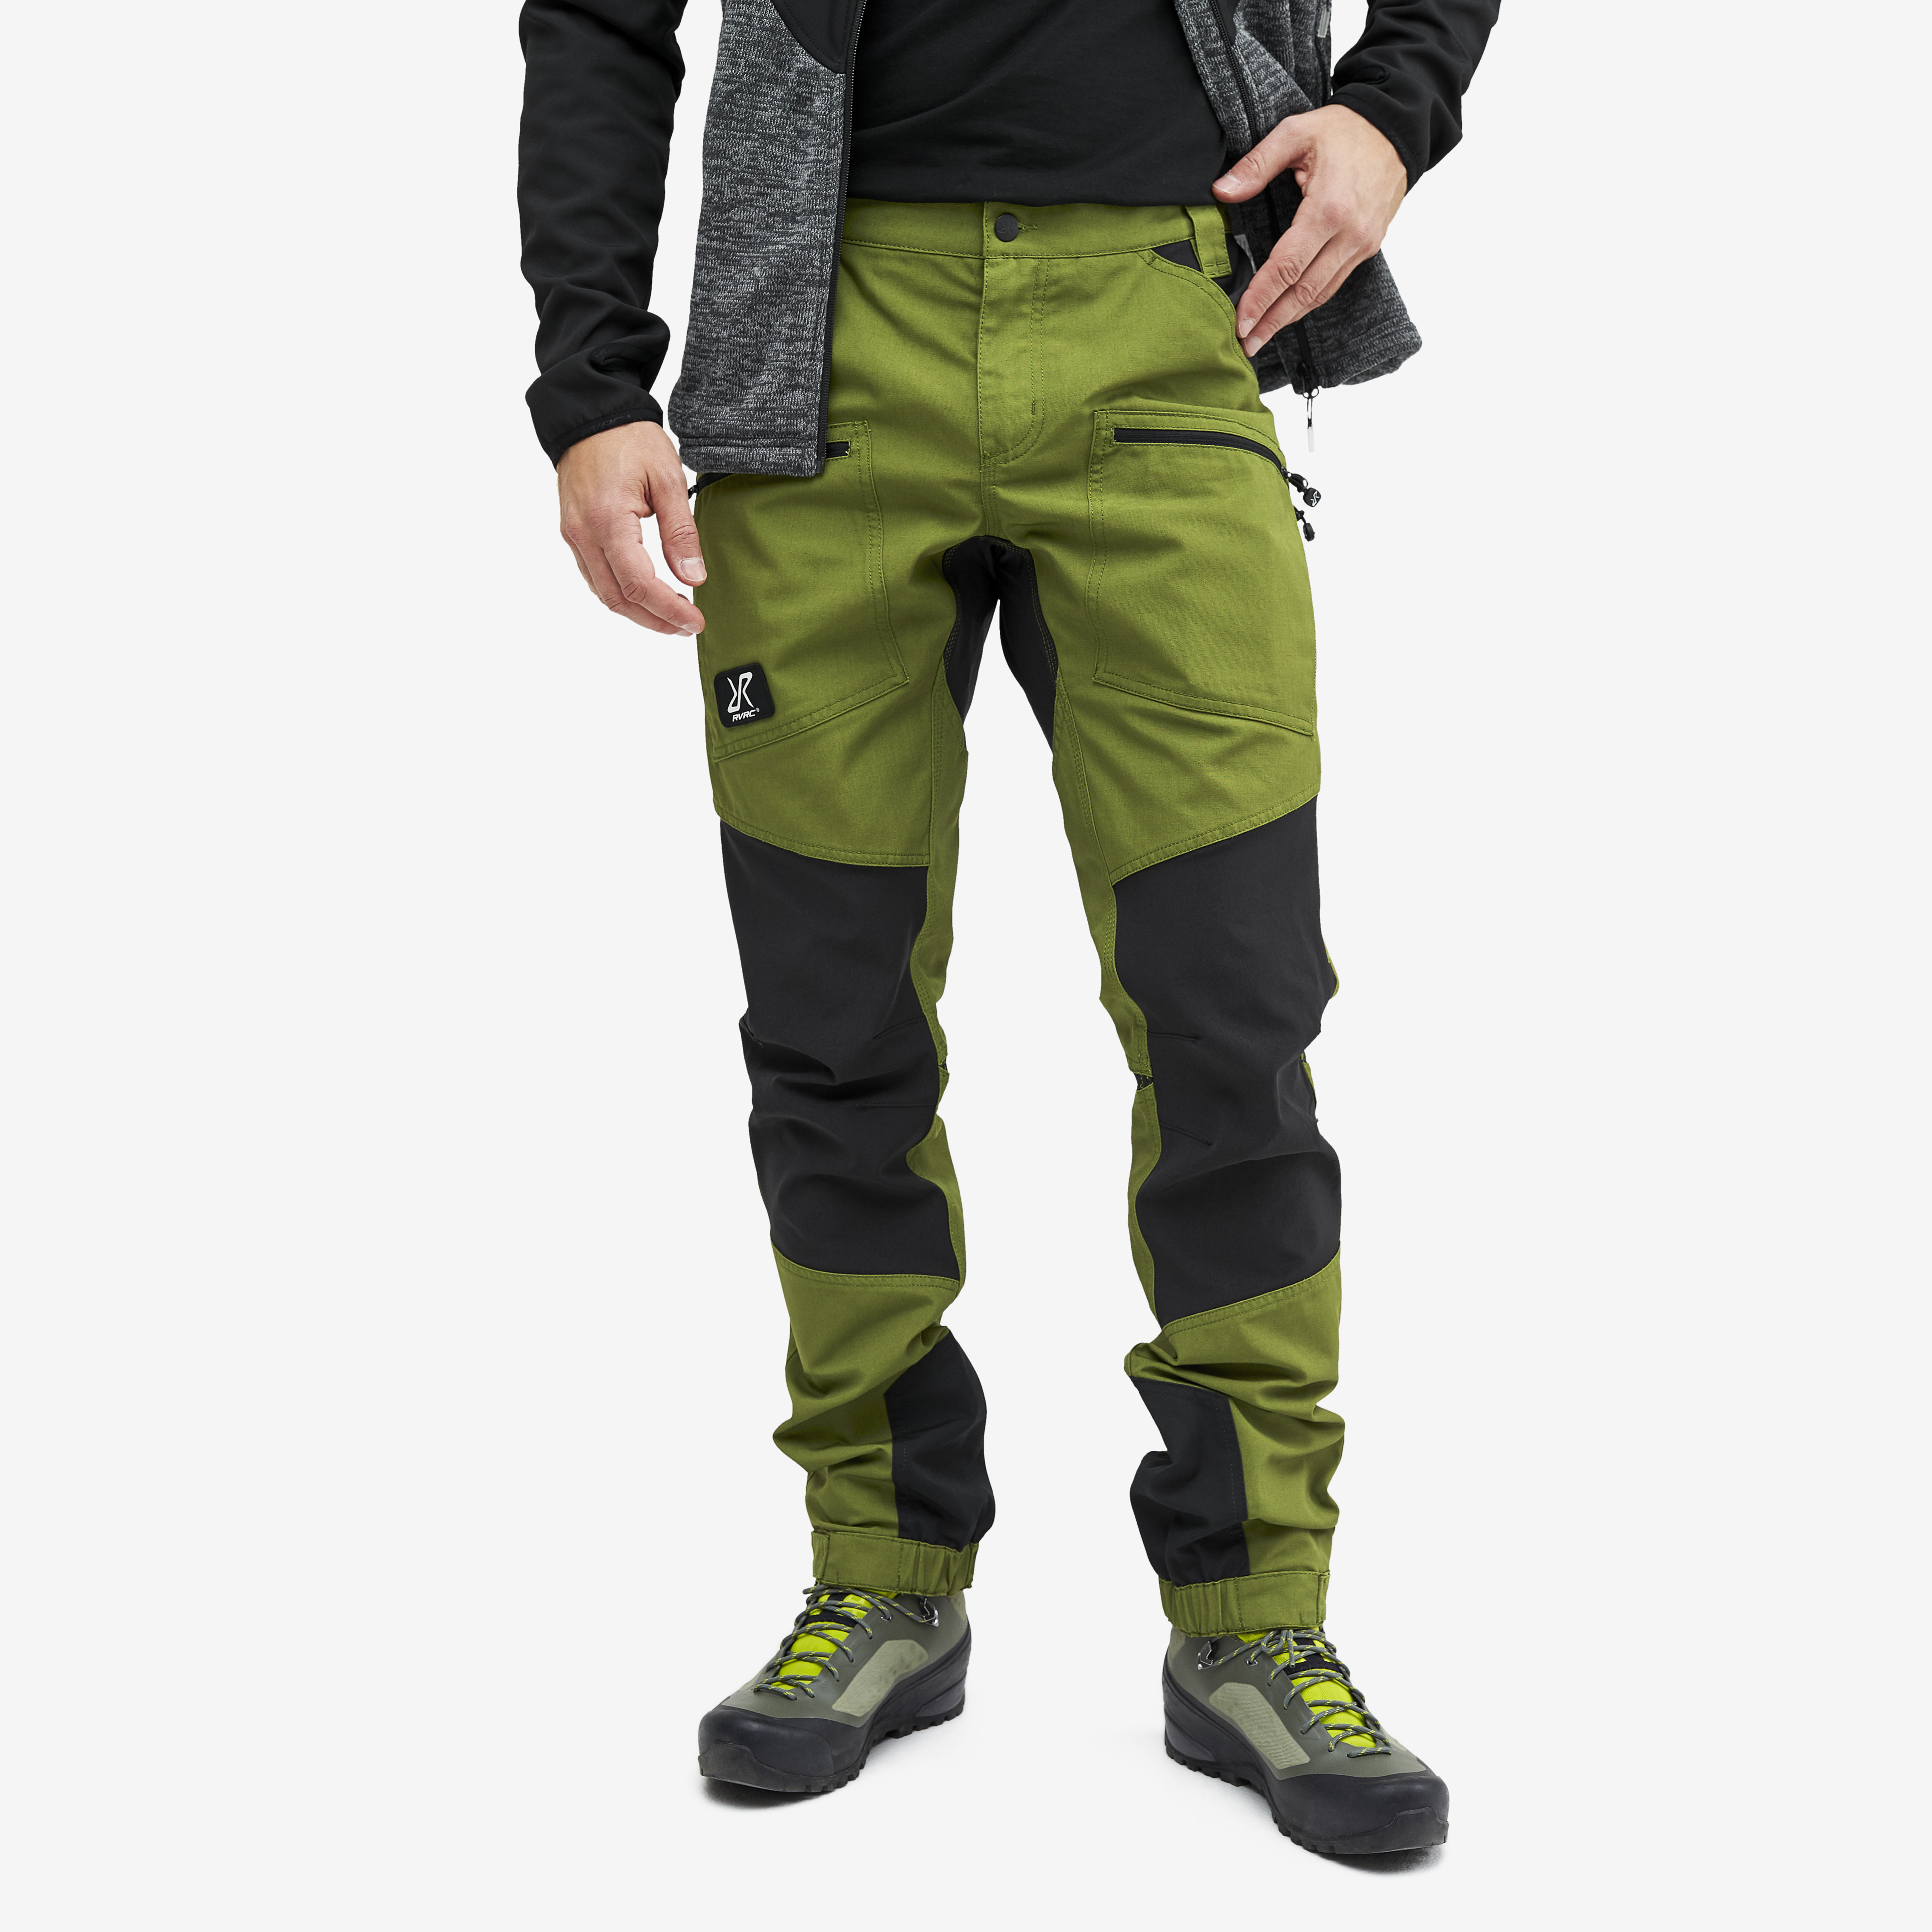 Nordwand Pro hiking pants for men in green